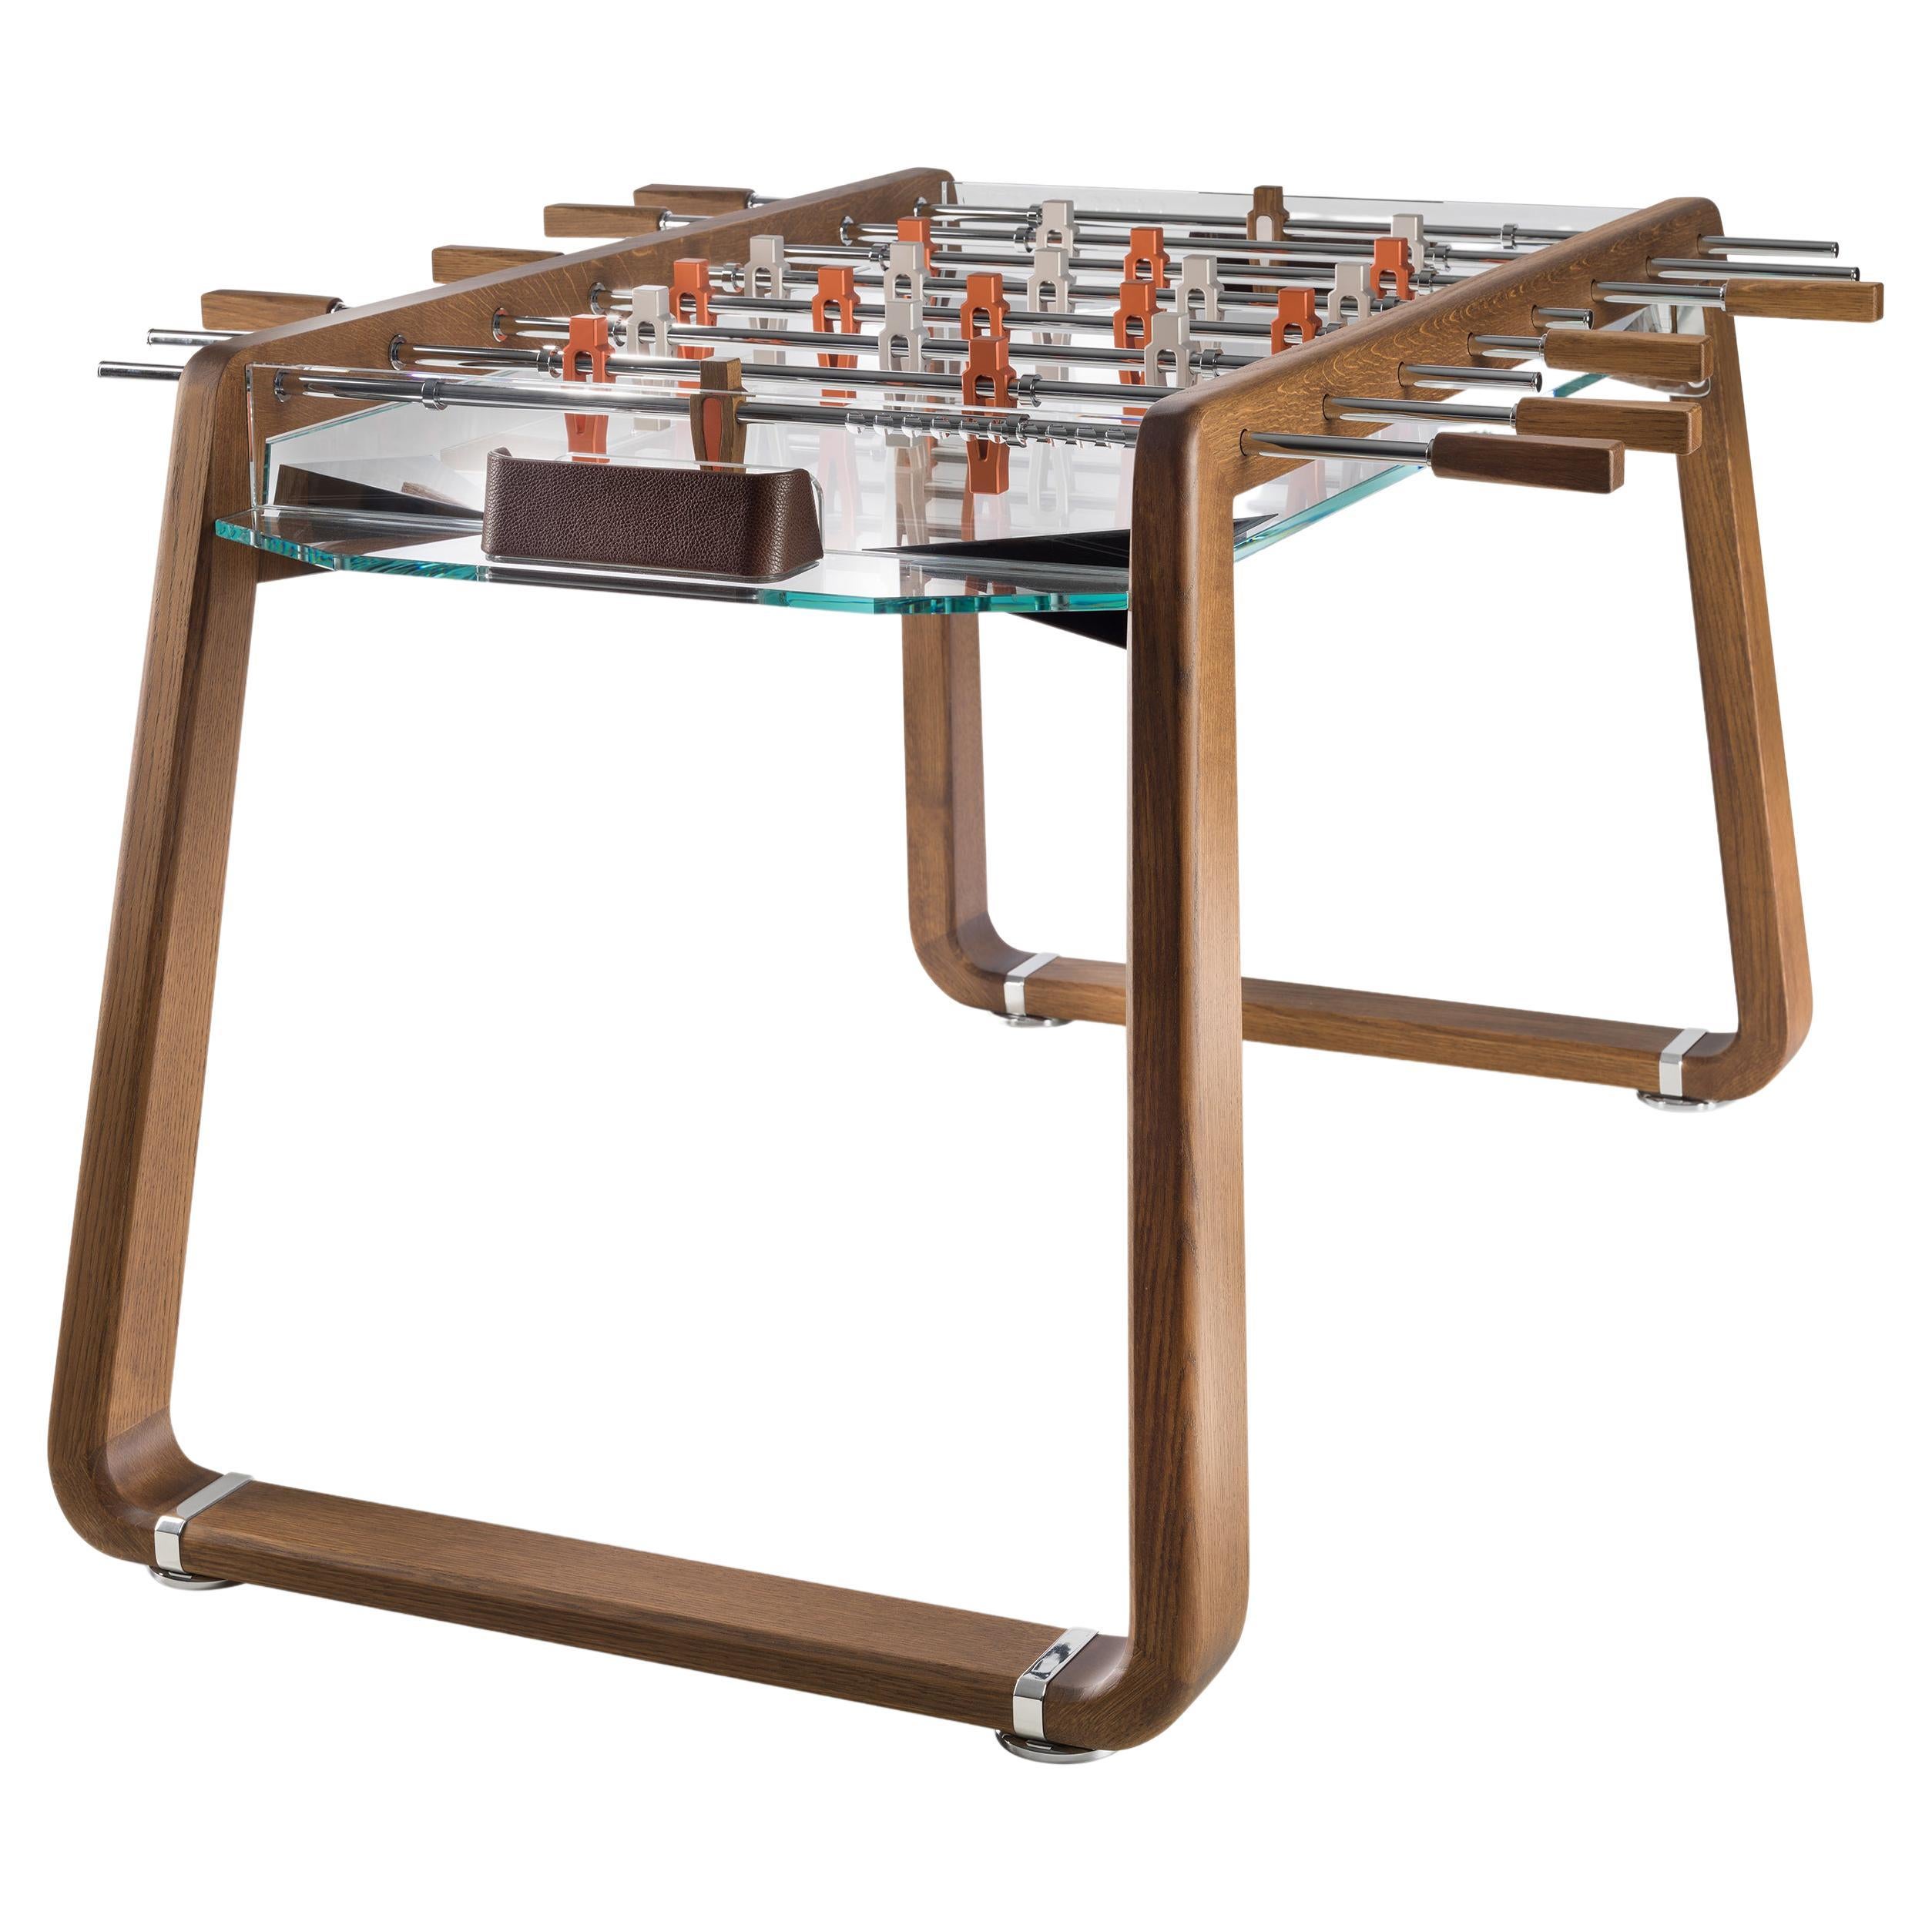 Contemporary Brown Wood Foosball Table with Glass Playing Field by Impatia